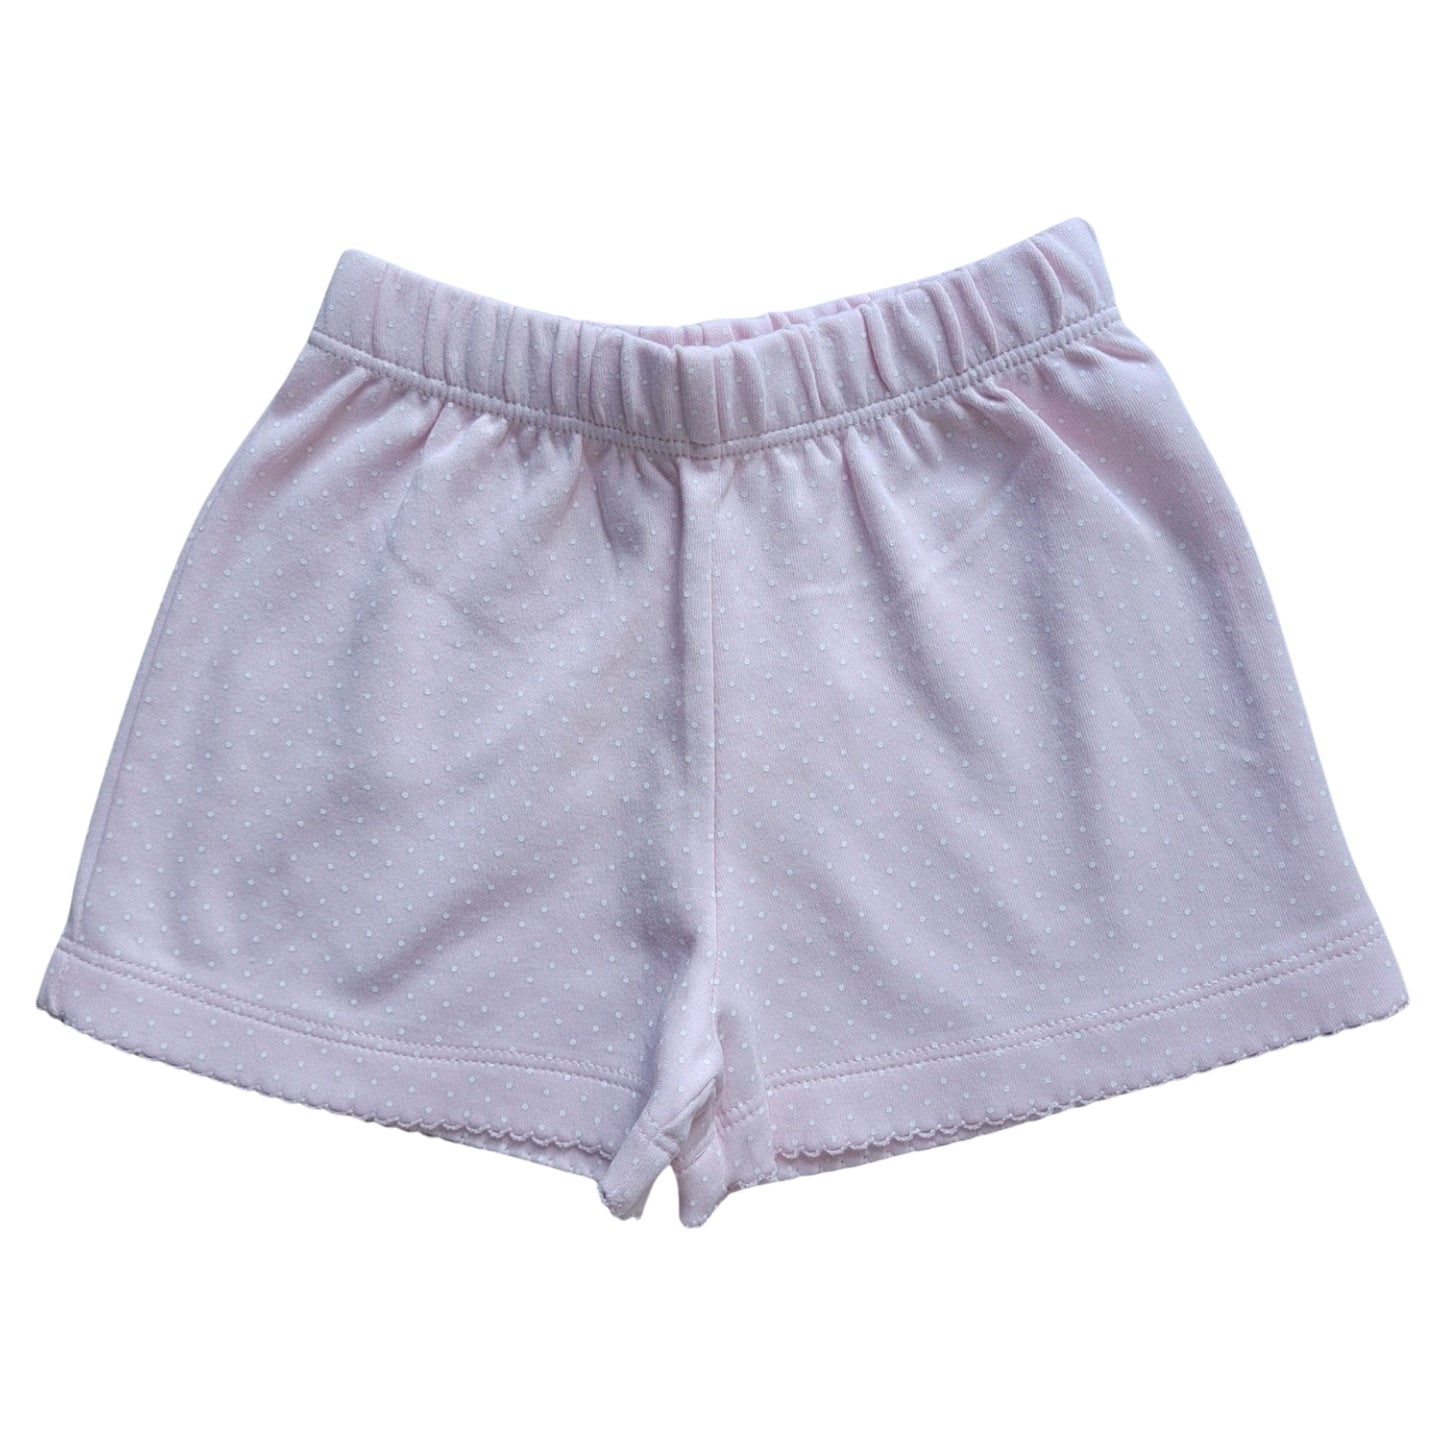 Girl Cotton Play Shorts, Light Pink with White Dots